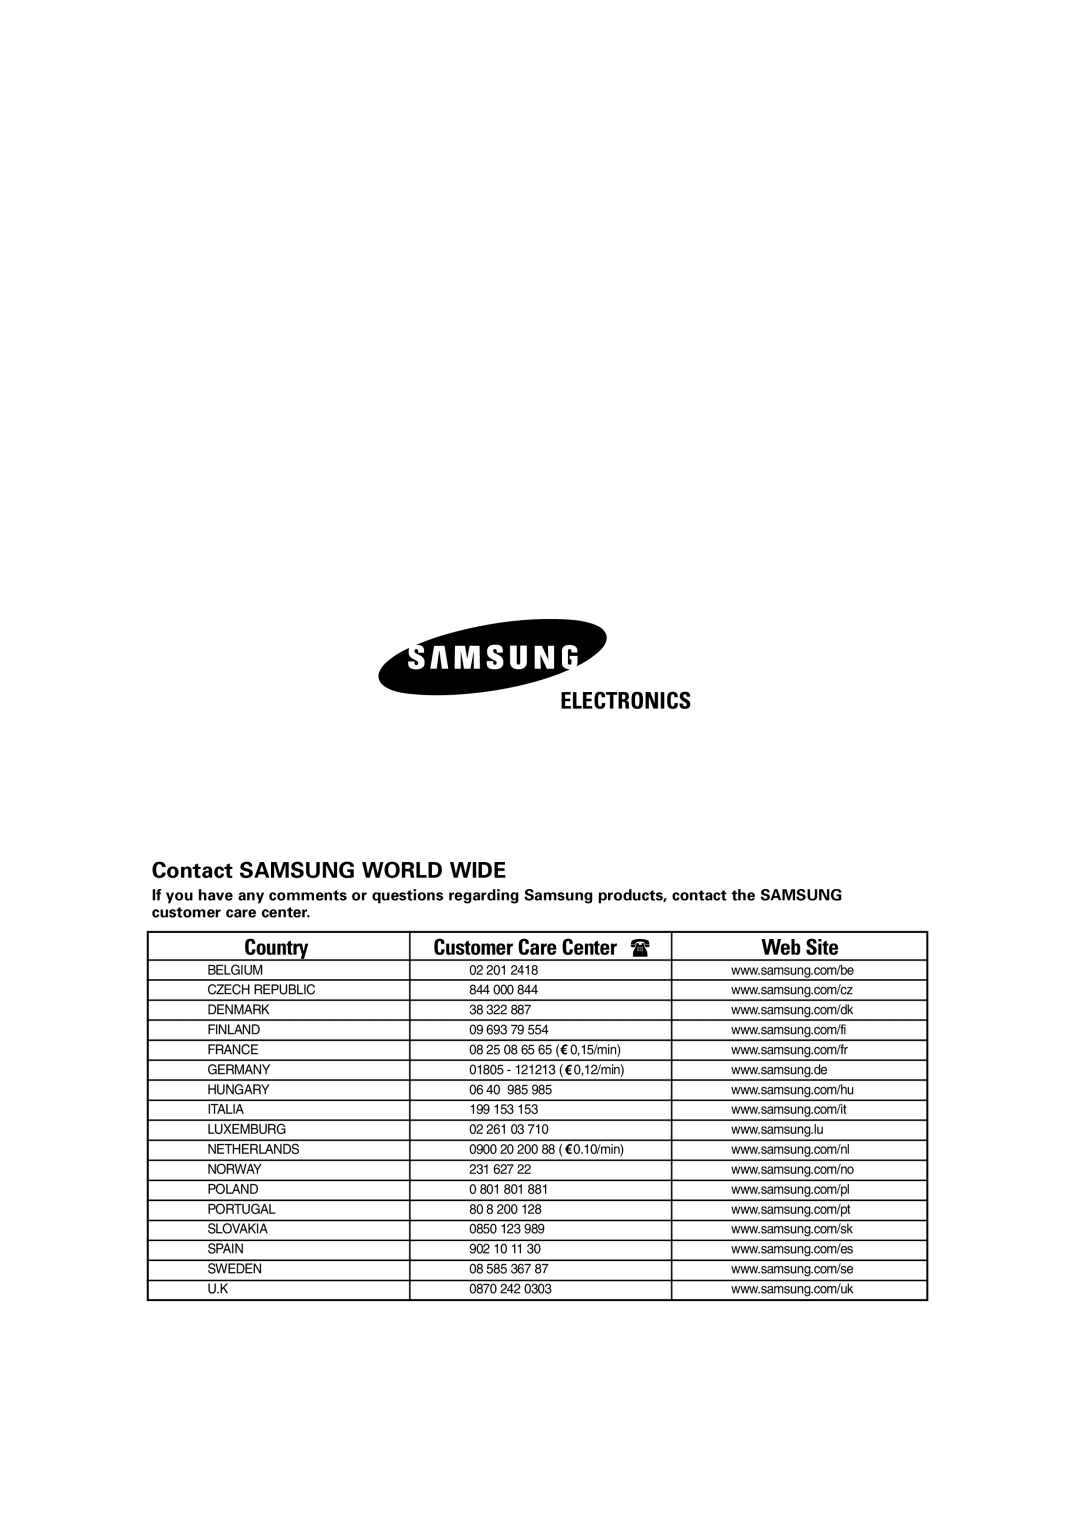 Samsung AS12HPBN manual Electronics, Contact SAMSUNG WORLD WIDE, Country, Customer Care Center, Web Site, Printed in Korea 